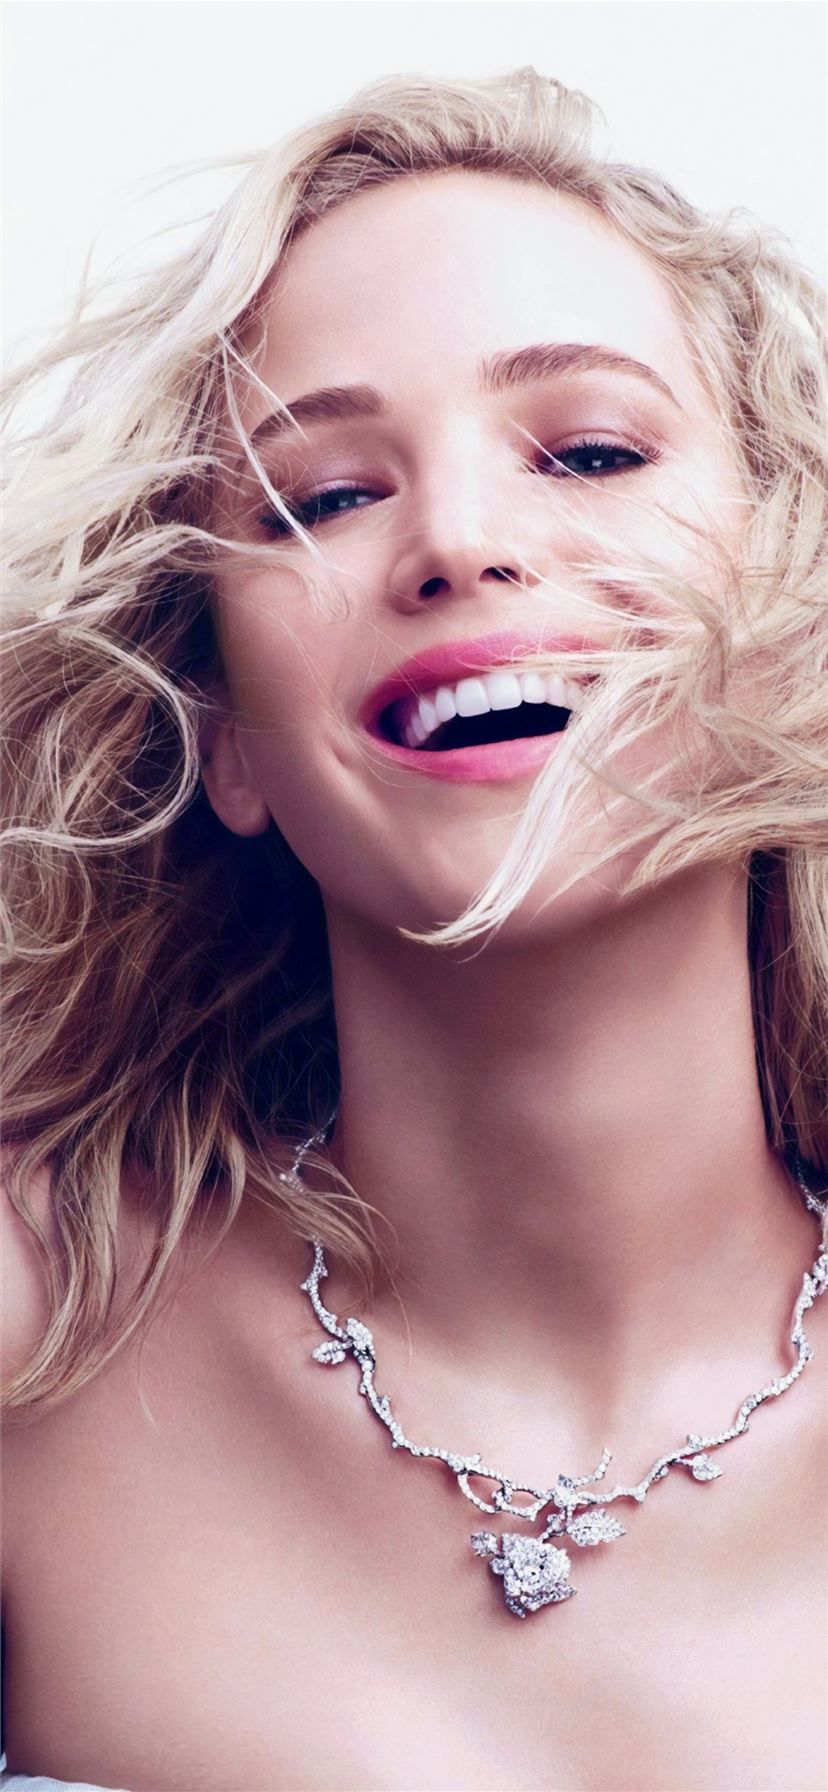 A blonde woman wearing jewelry and smiling - Dior